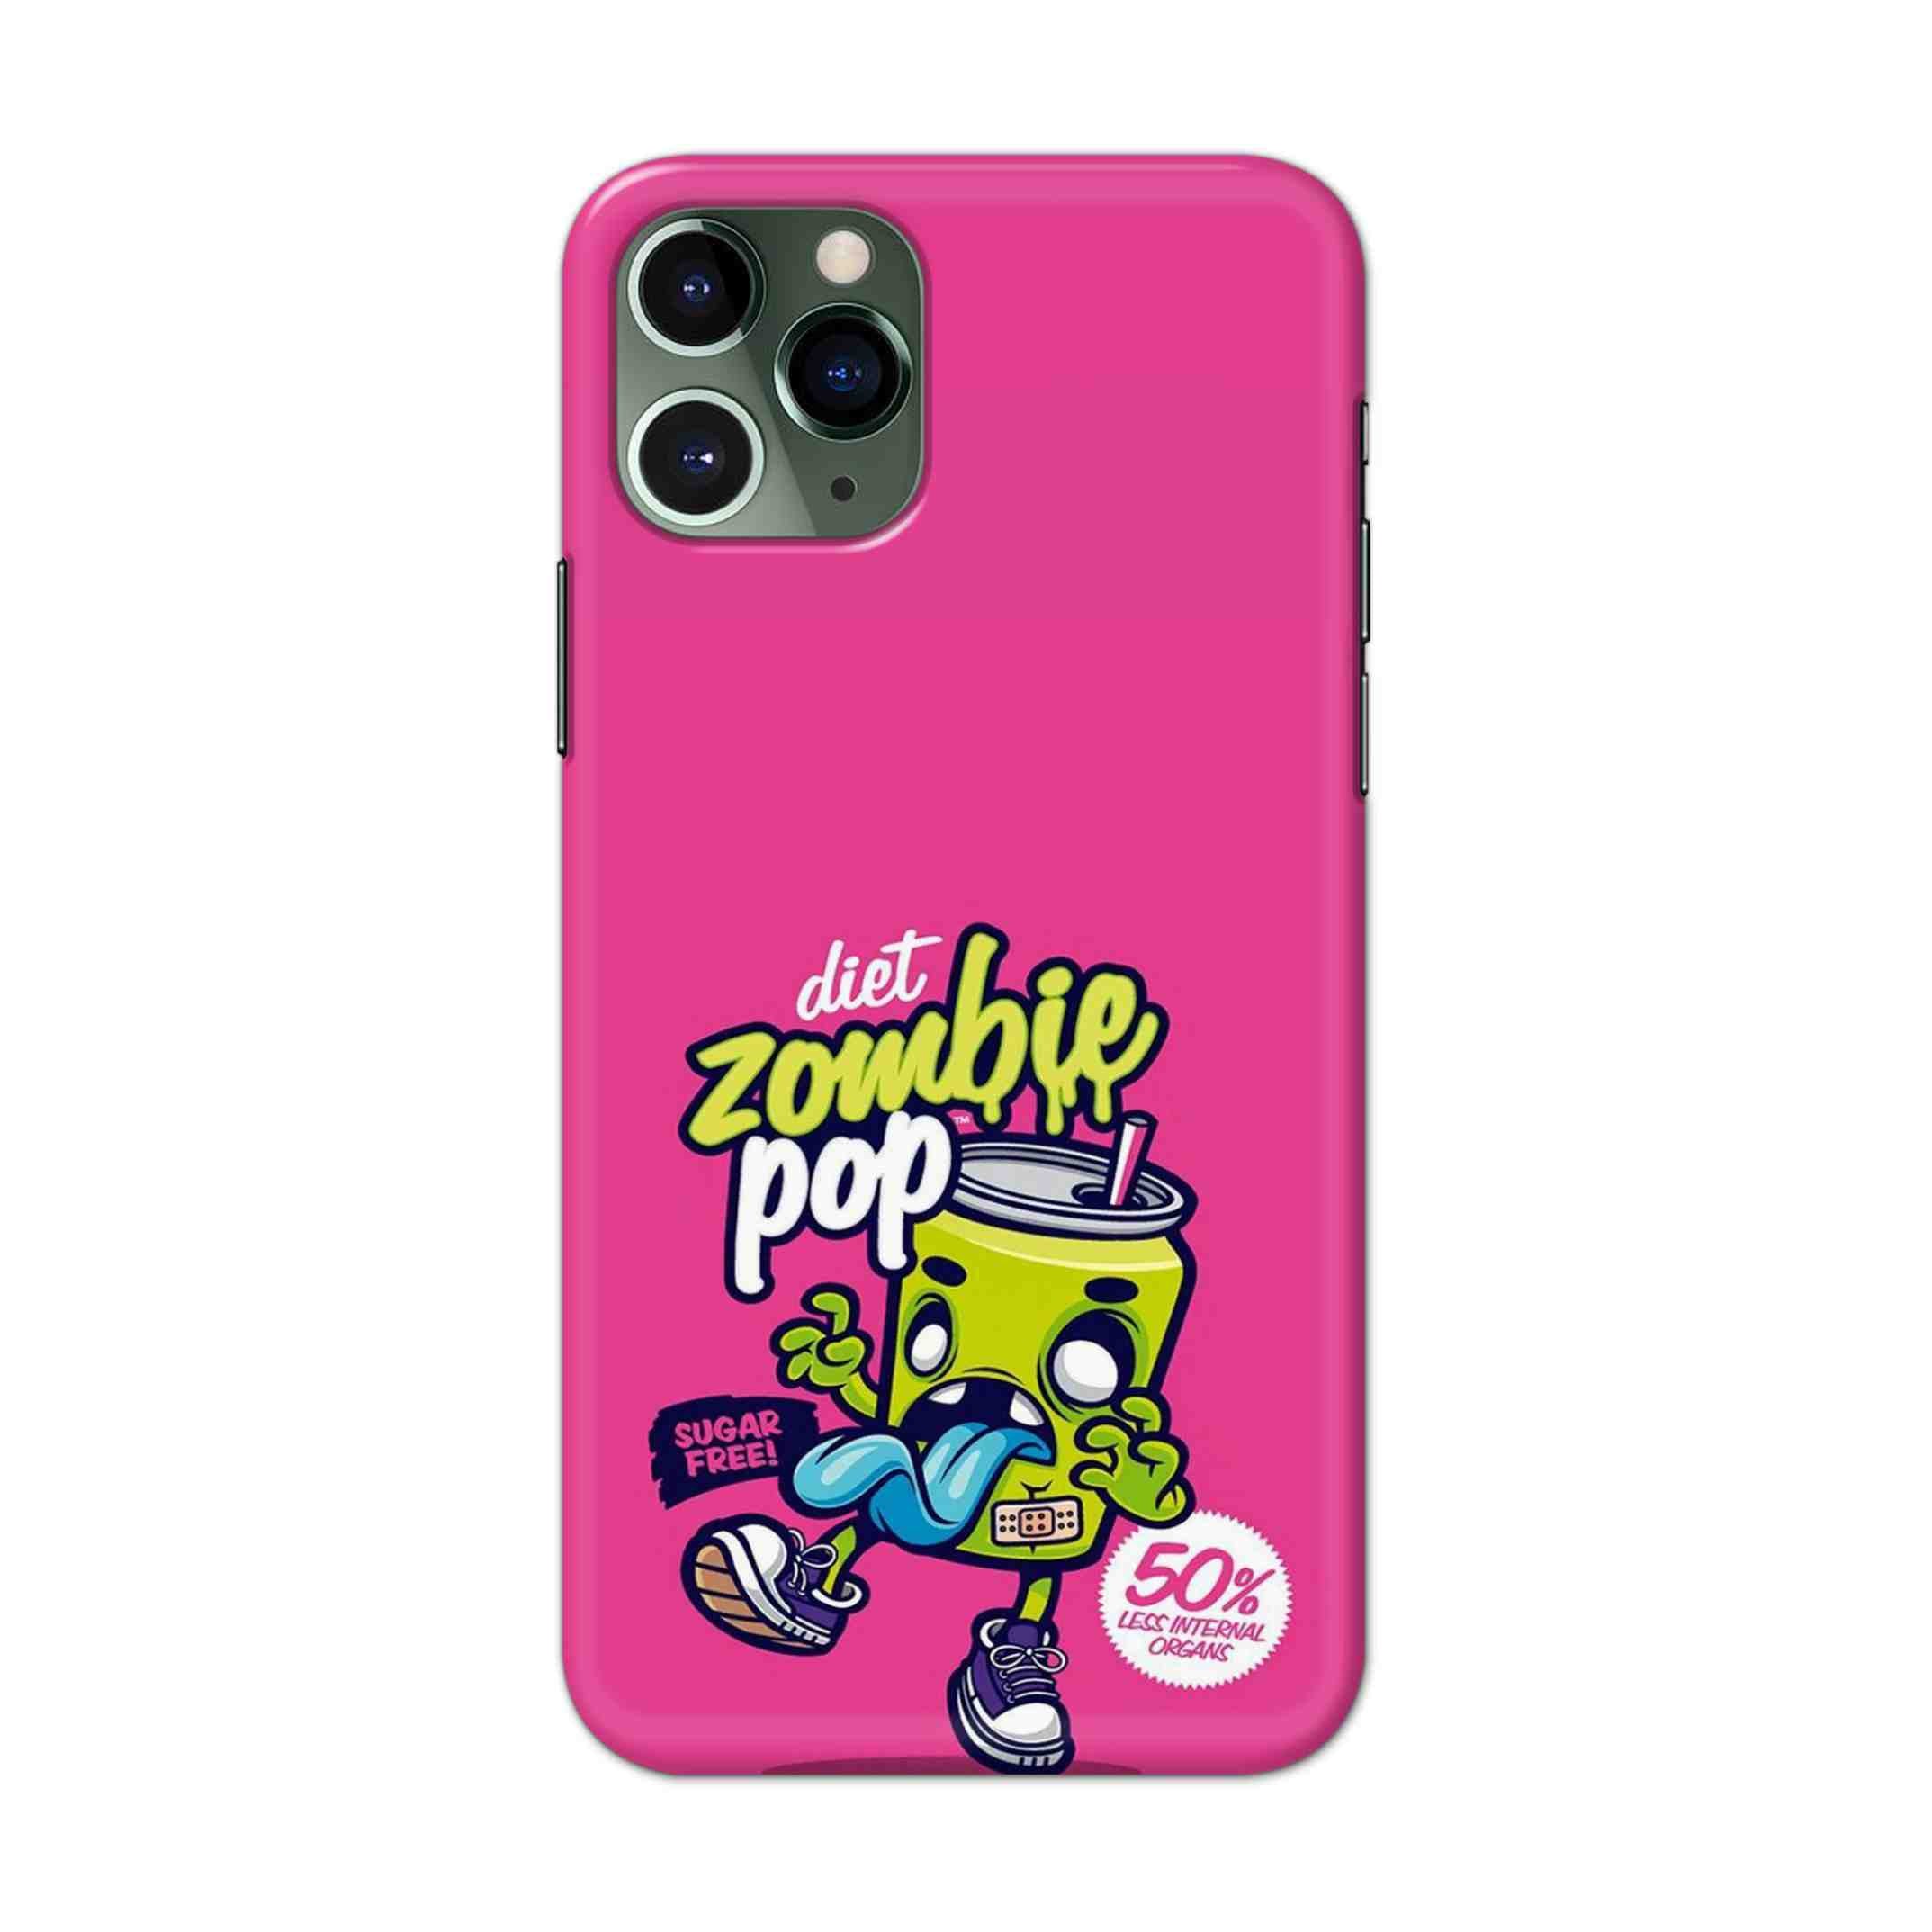 Buy Zombie Pop Hard Back Mobile Phone Case/Cover For iPhone 11 Pro Online